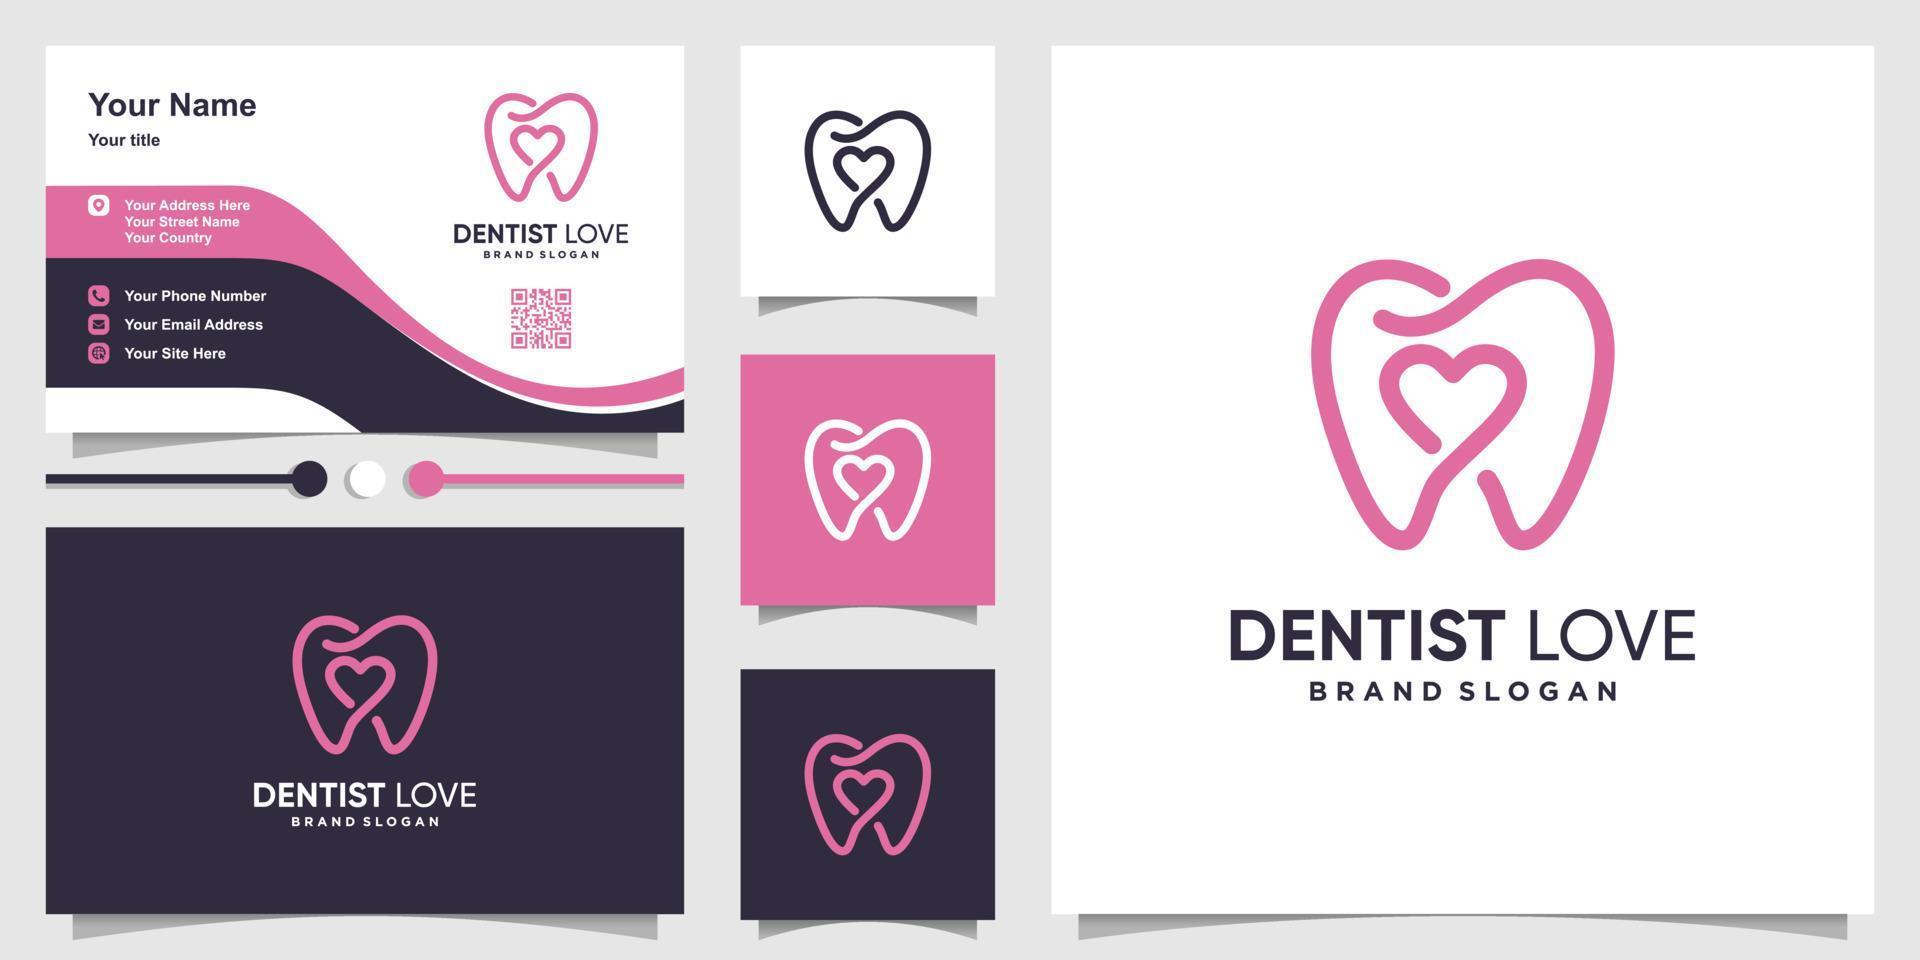 Unique dentist logo with love inside and business card design Premium Vector